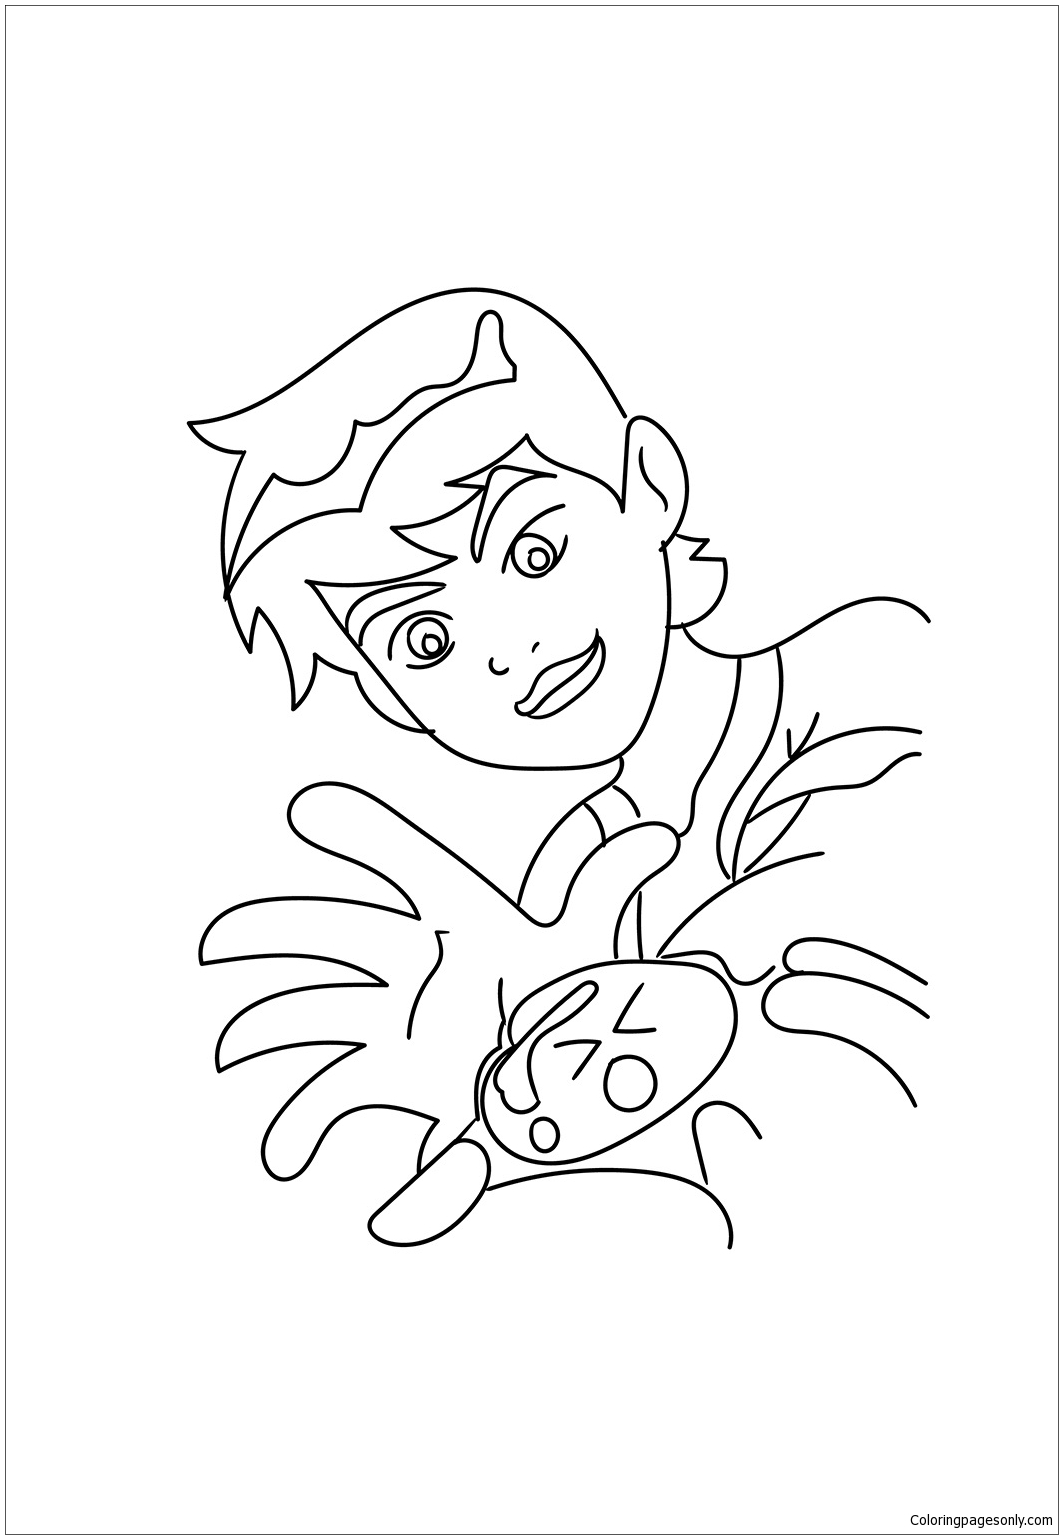 The Classic Ben 10 Coloring Pages